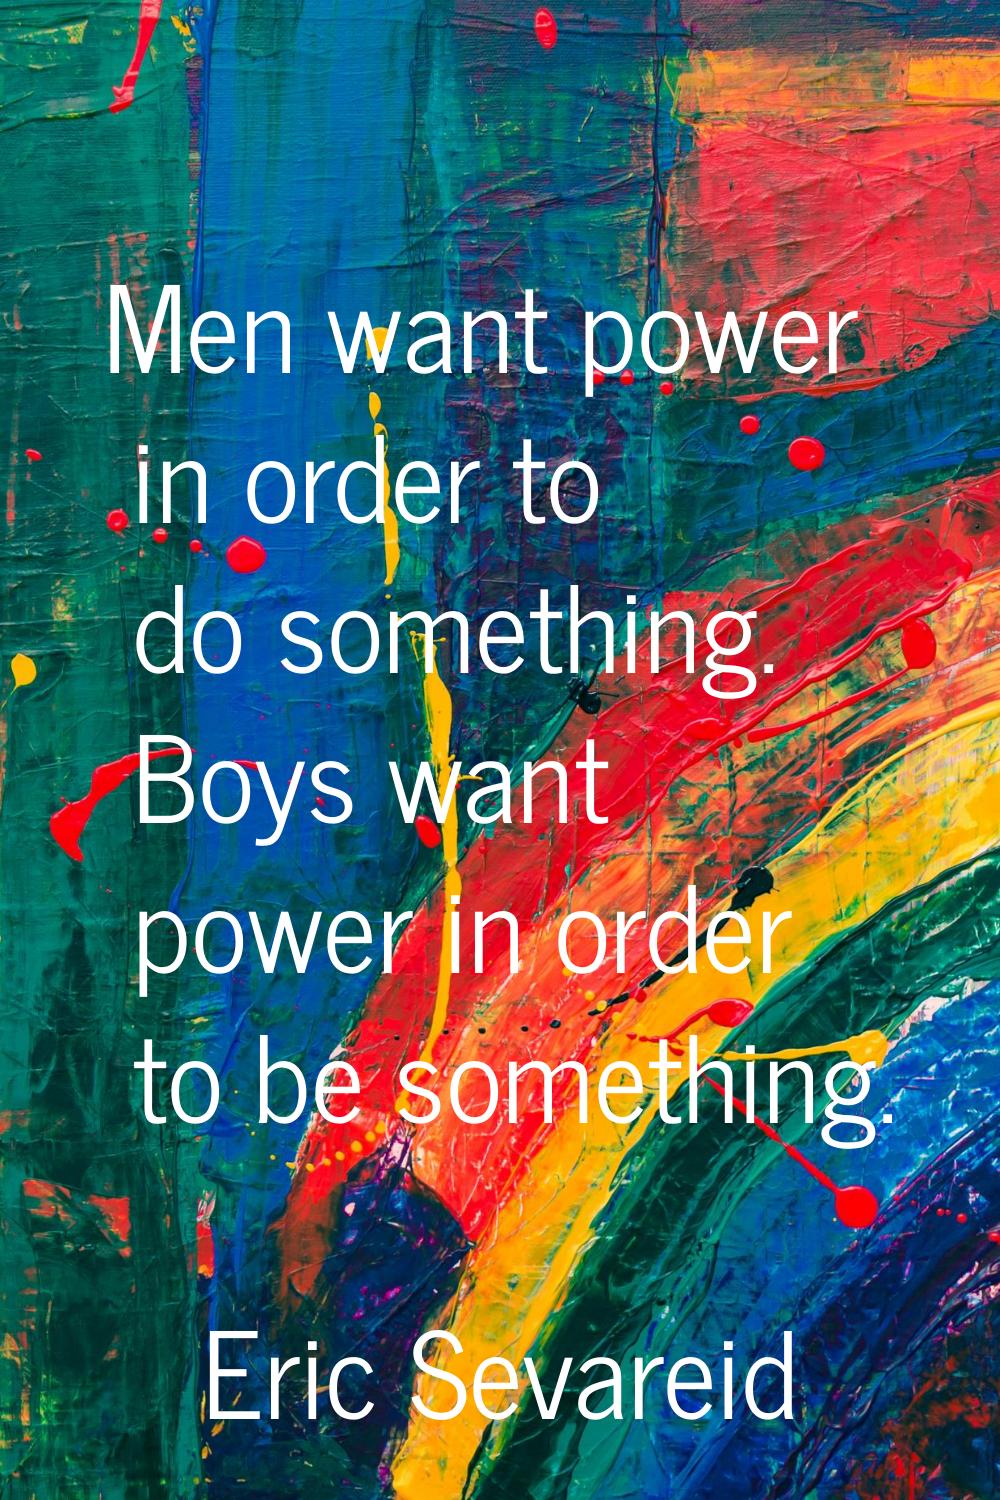 Men want power in order to do something. Boys want power in order to be something.